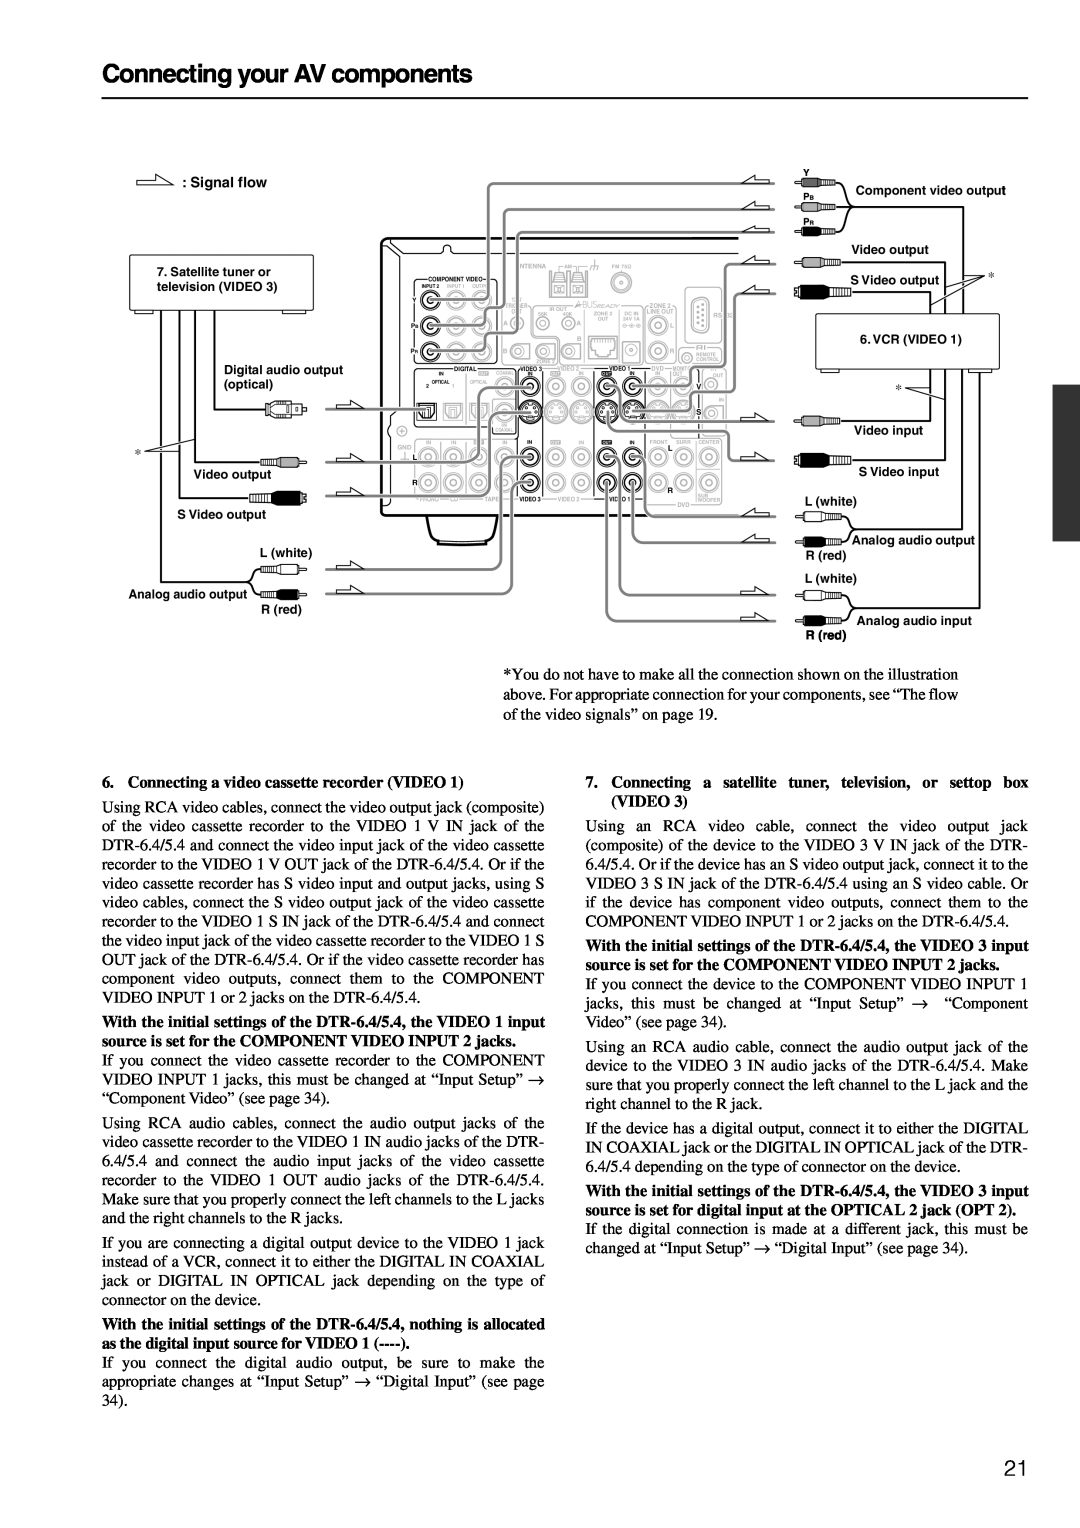 Integra DTR-6.4/5.4 instruction manual Connecting your AV components, Connecting a video cassette recorder VIDEO 